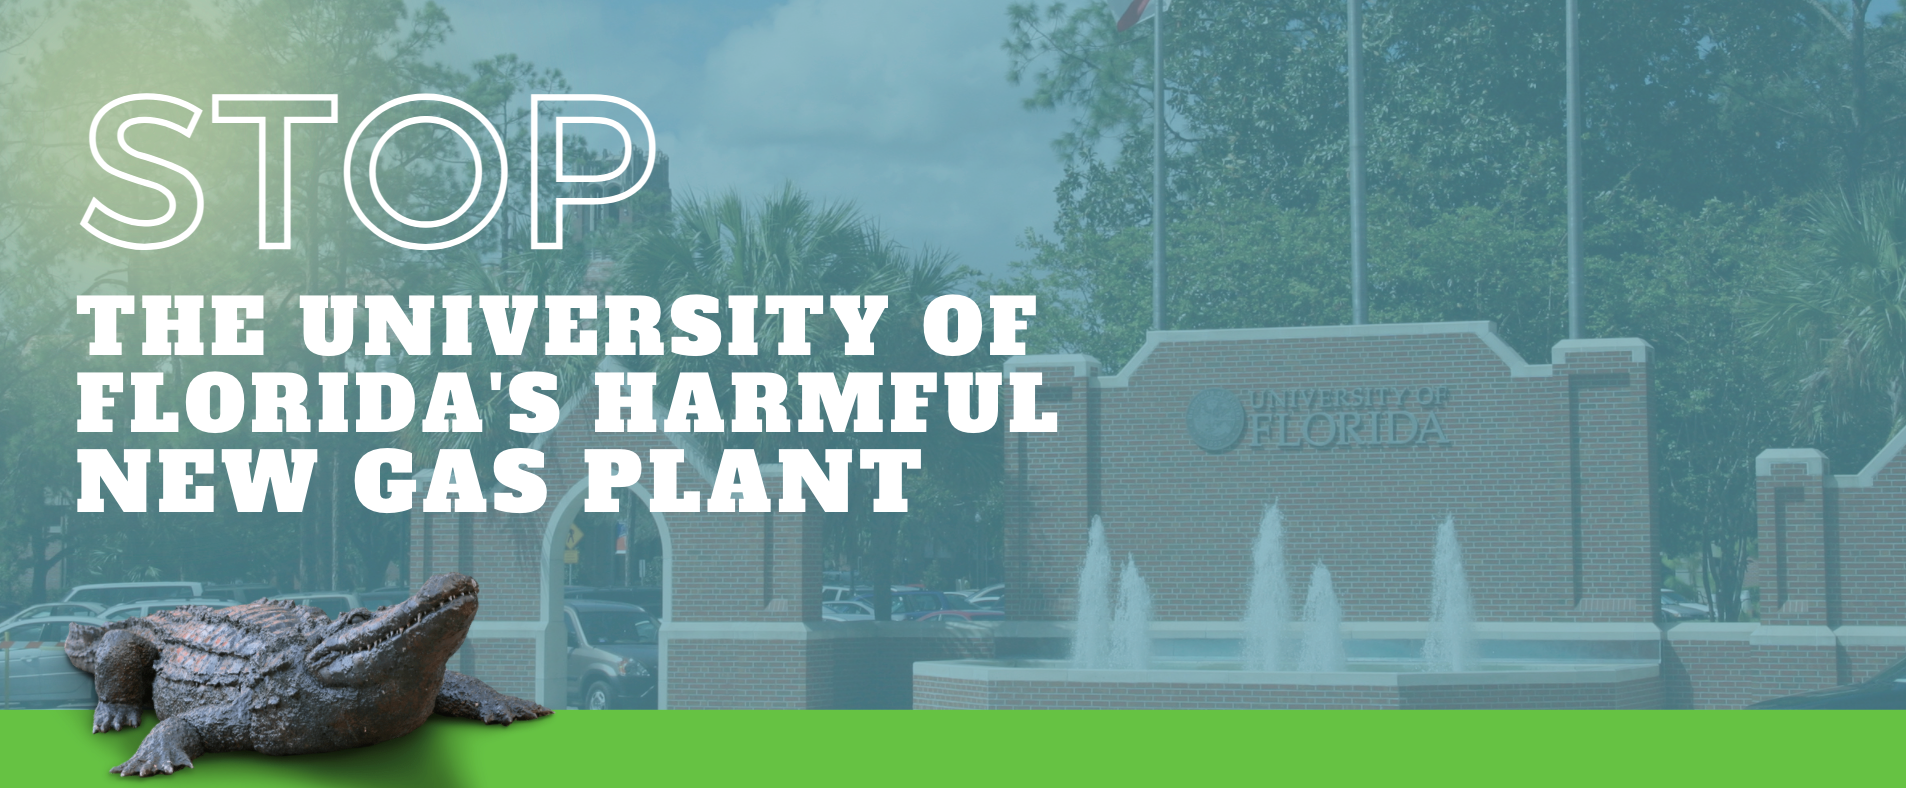 Stop UF gas plant